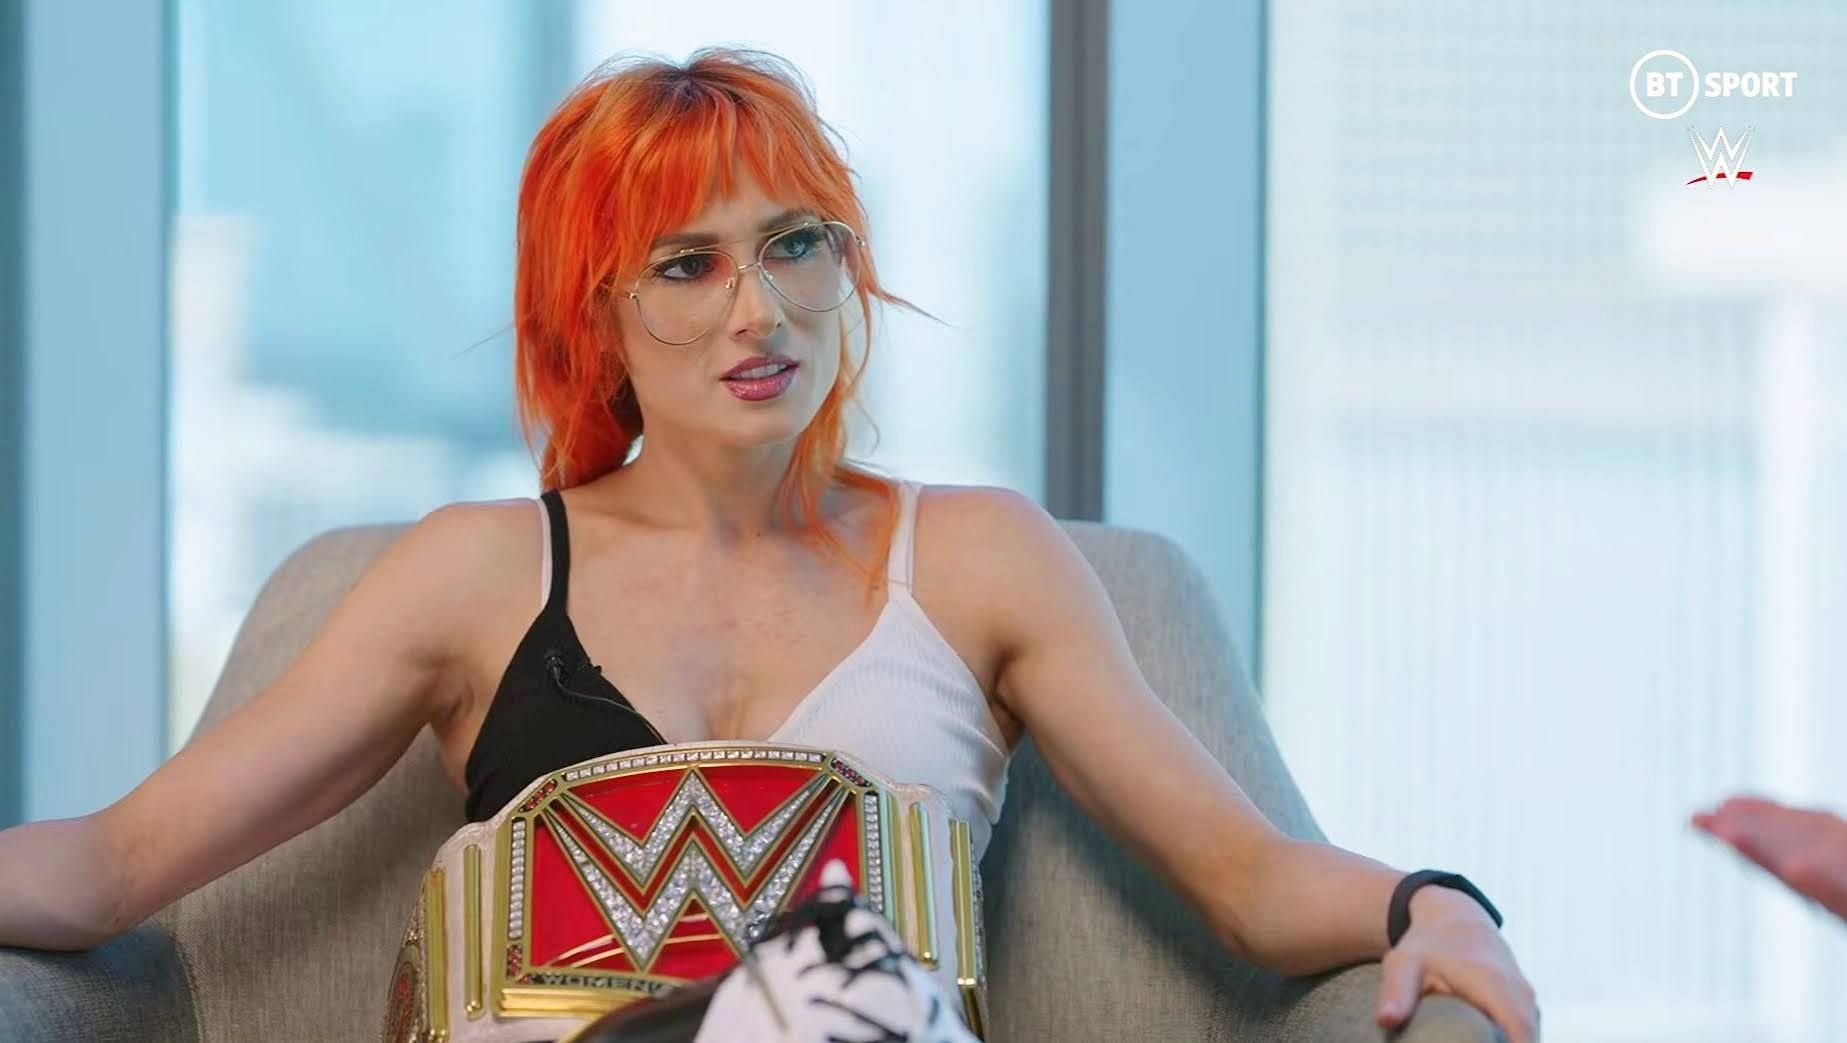 Logan who? Becky Lynch calls out the Paul Brothers ahead of WrestleMania